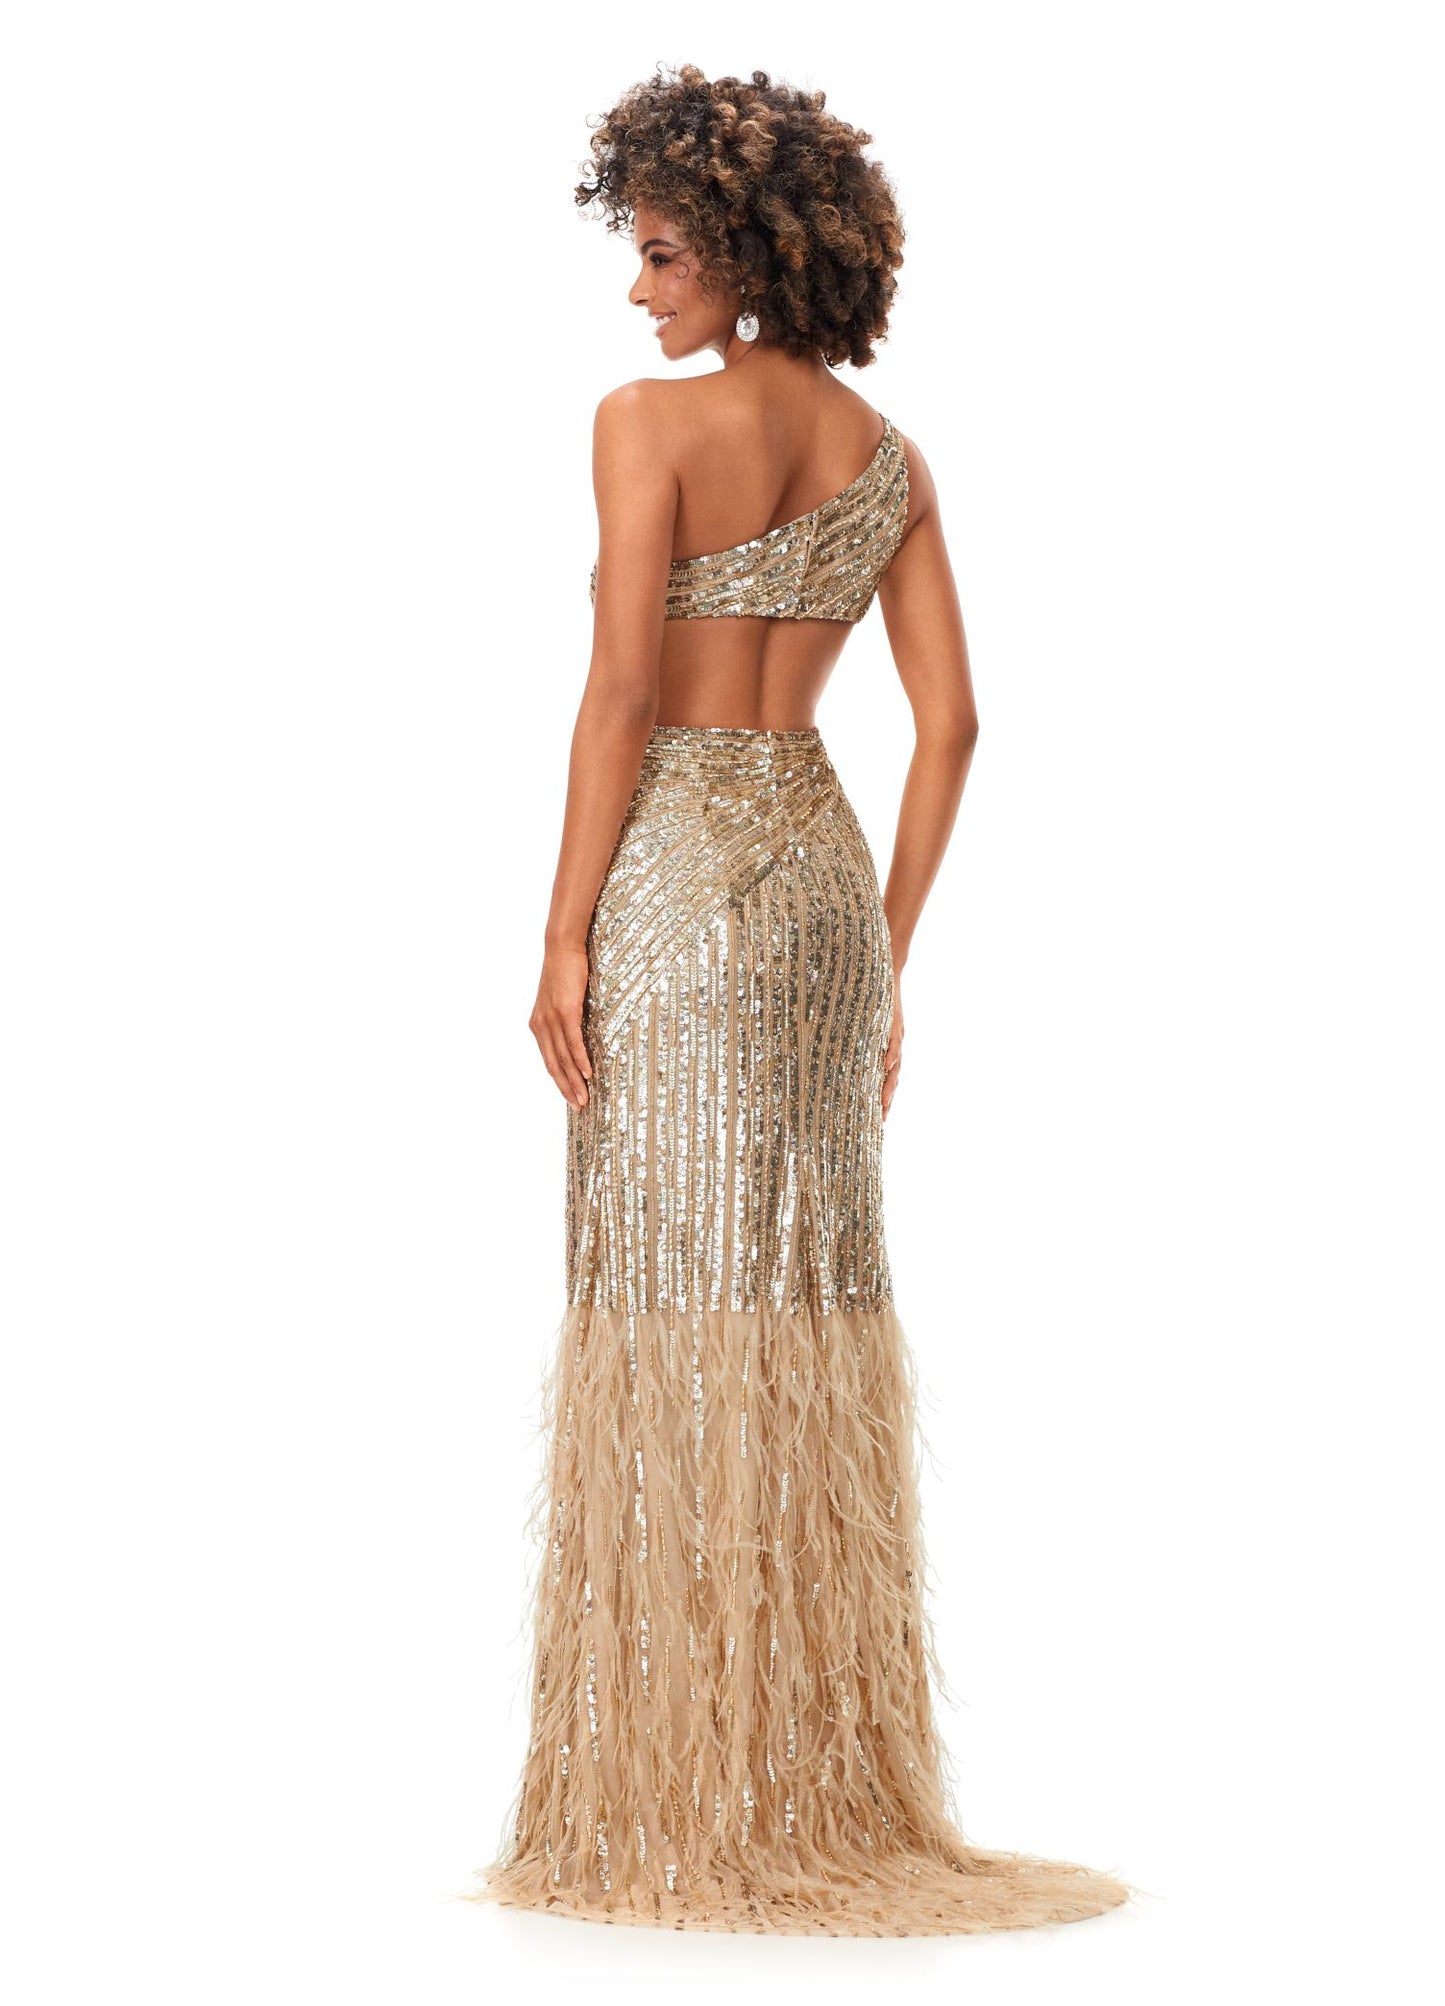 Ashley Lauren 11350 This striking one shoulder gown is accented with an asymmetric bead pattern to accenuate your curves. The fitted skirt is completed with feathers near the hemline and a left leg slit. One Shoulder Feather Details Left Leg Slit Fully Hand Beaded COLORS: Gold, Ivory, Black, Red